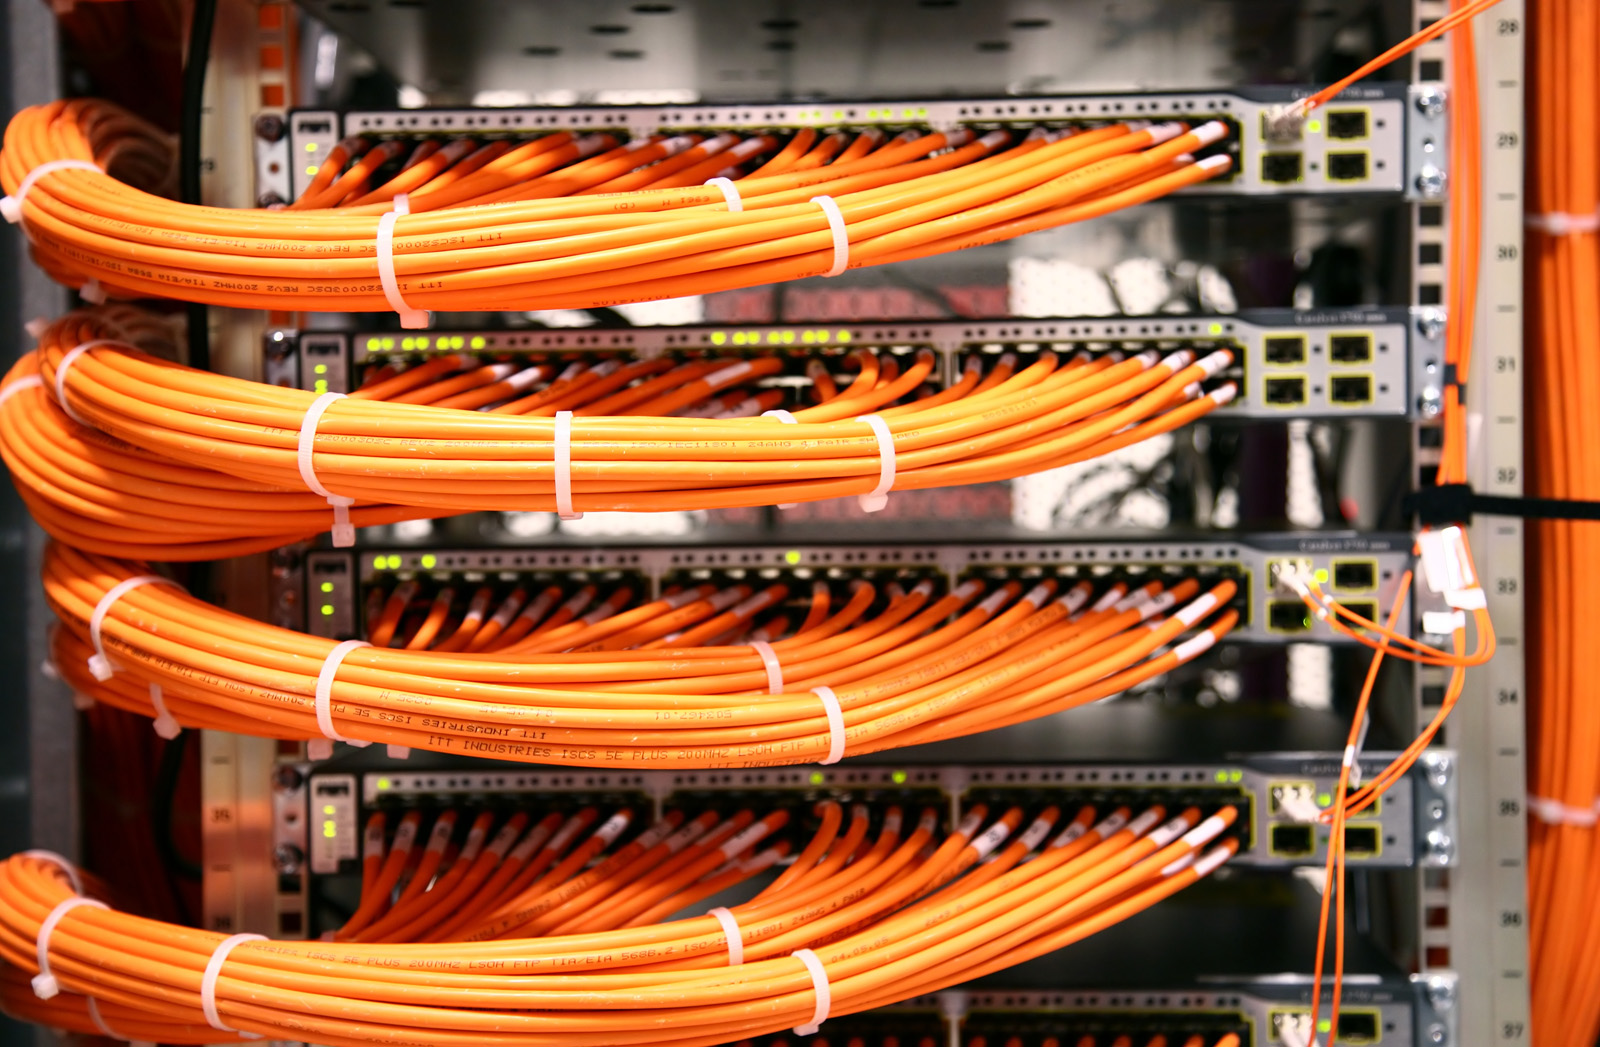 Corbin Kentucky Trusted Voice & Data Network Cabling Contractor